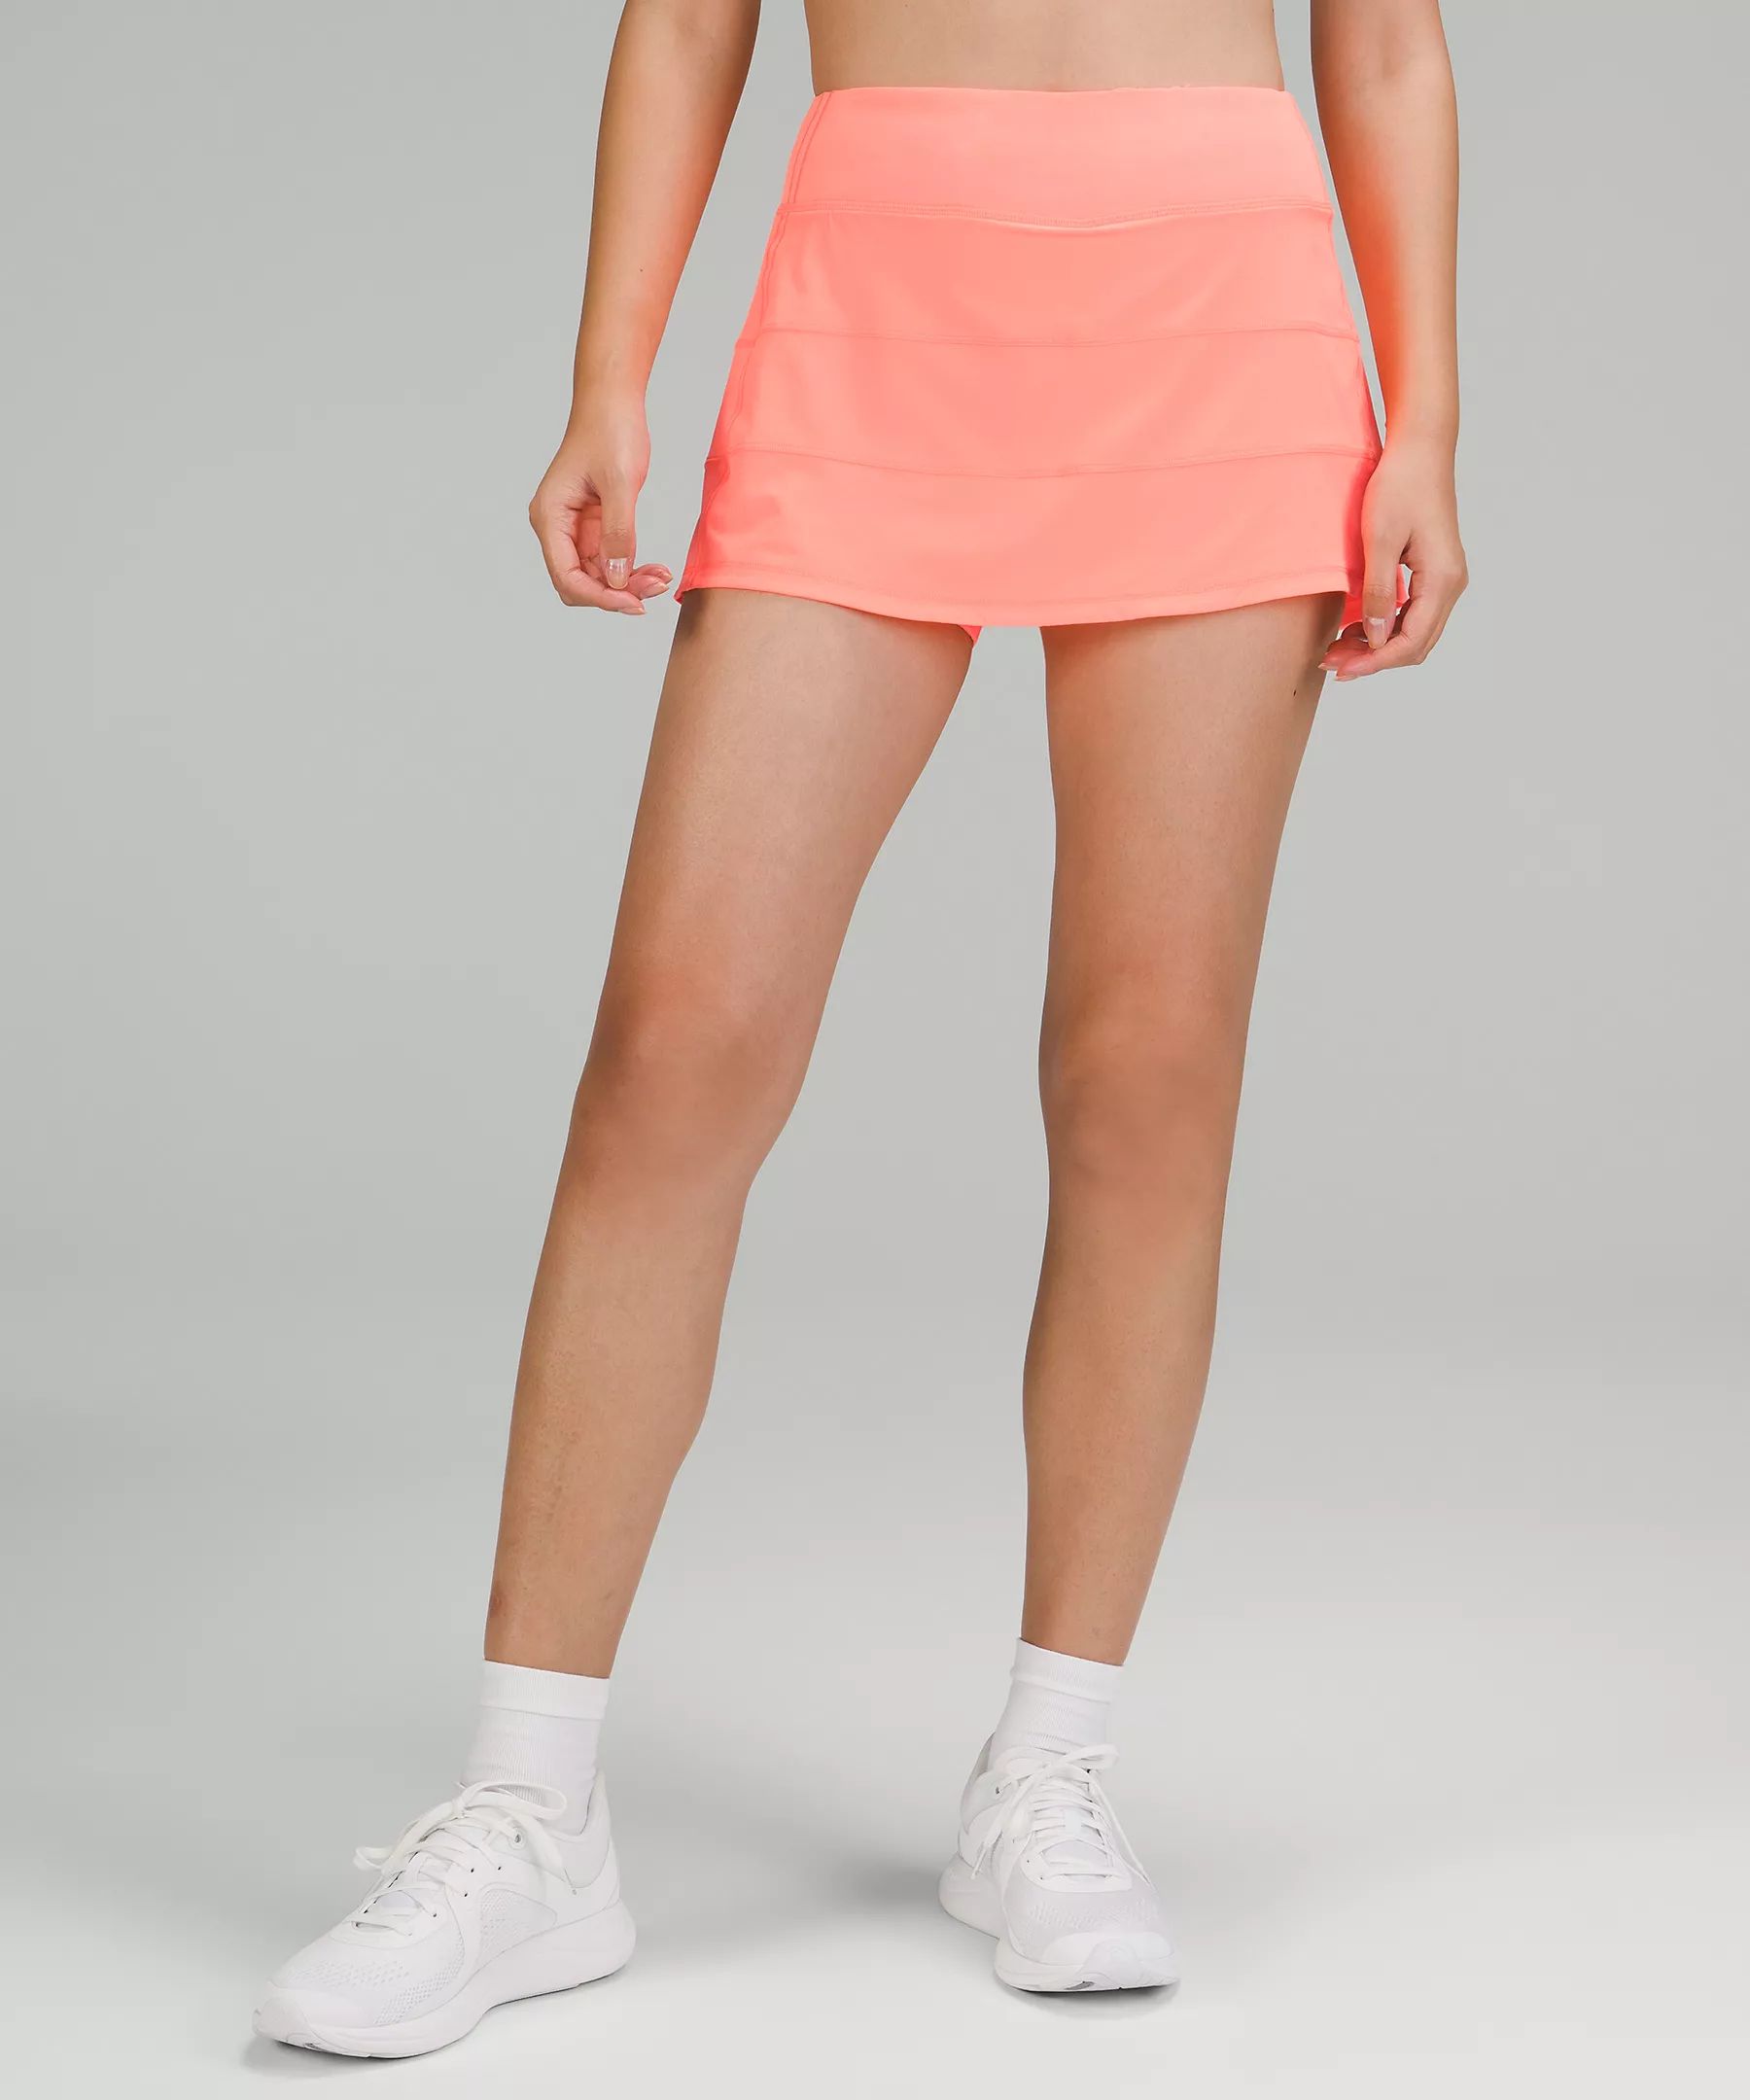 Pace Rival Mid-Rise Skirt Online Only | Lululemon (US)